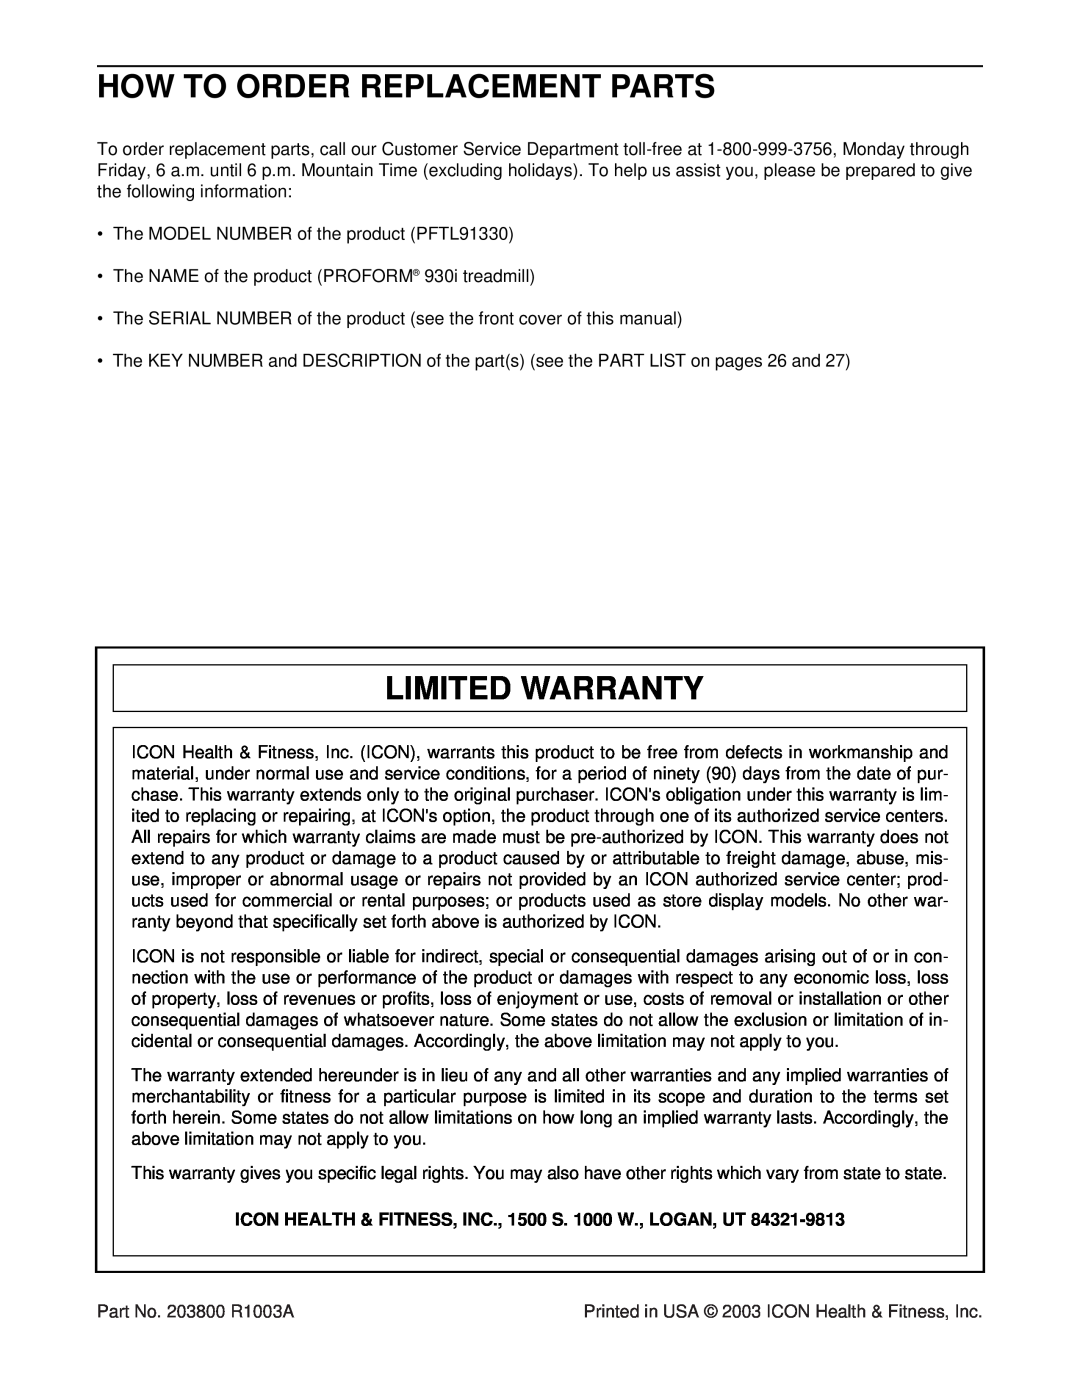 ProForm PFTL91330 user manual How To Order Replacement Parts, Limited Warranty 